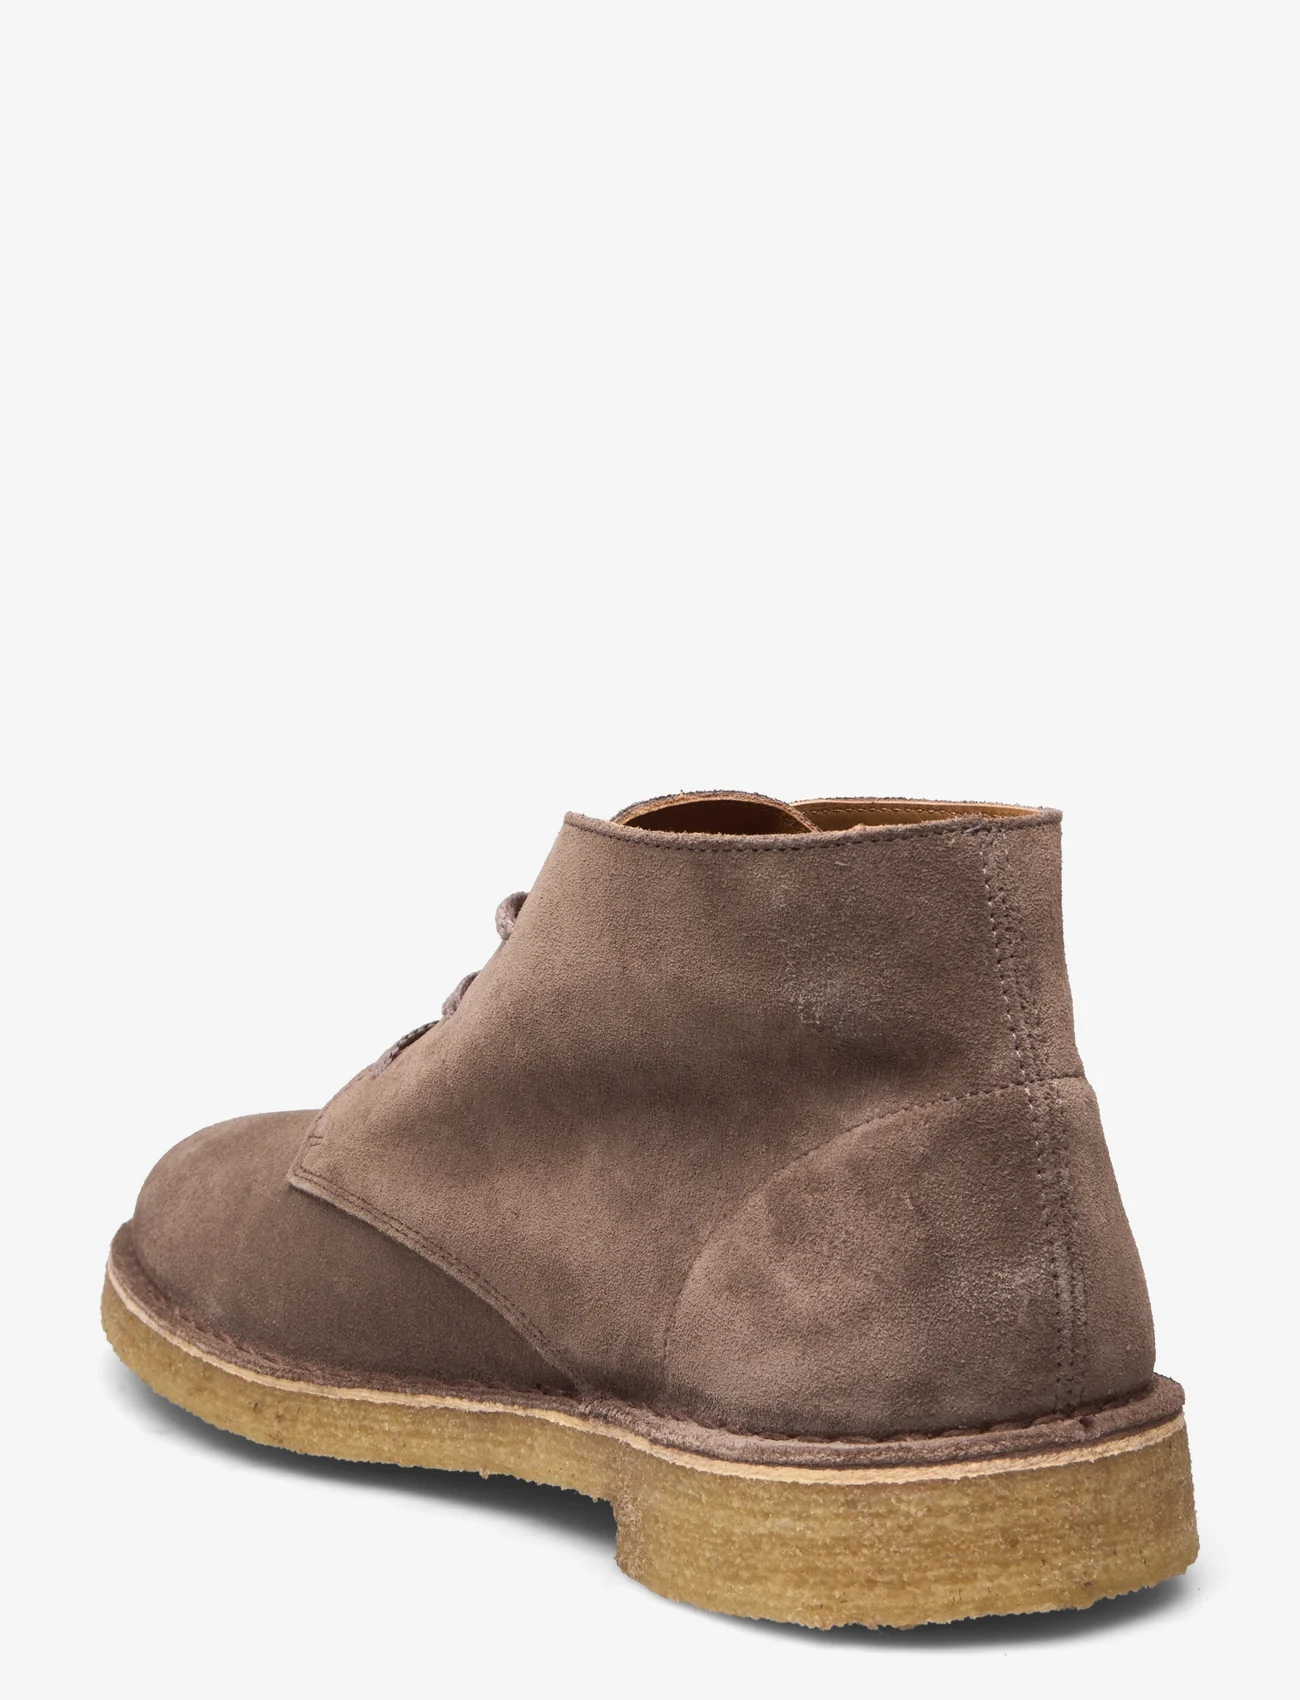 Selected Homme - SLHRICCO SUEDE CHUKKA BOOT - lace ups - almondine - 1